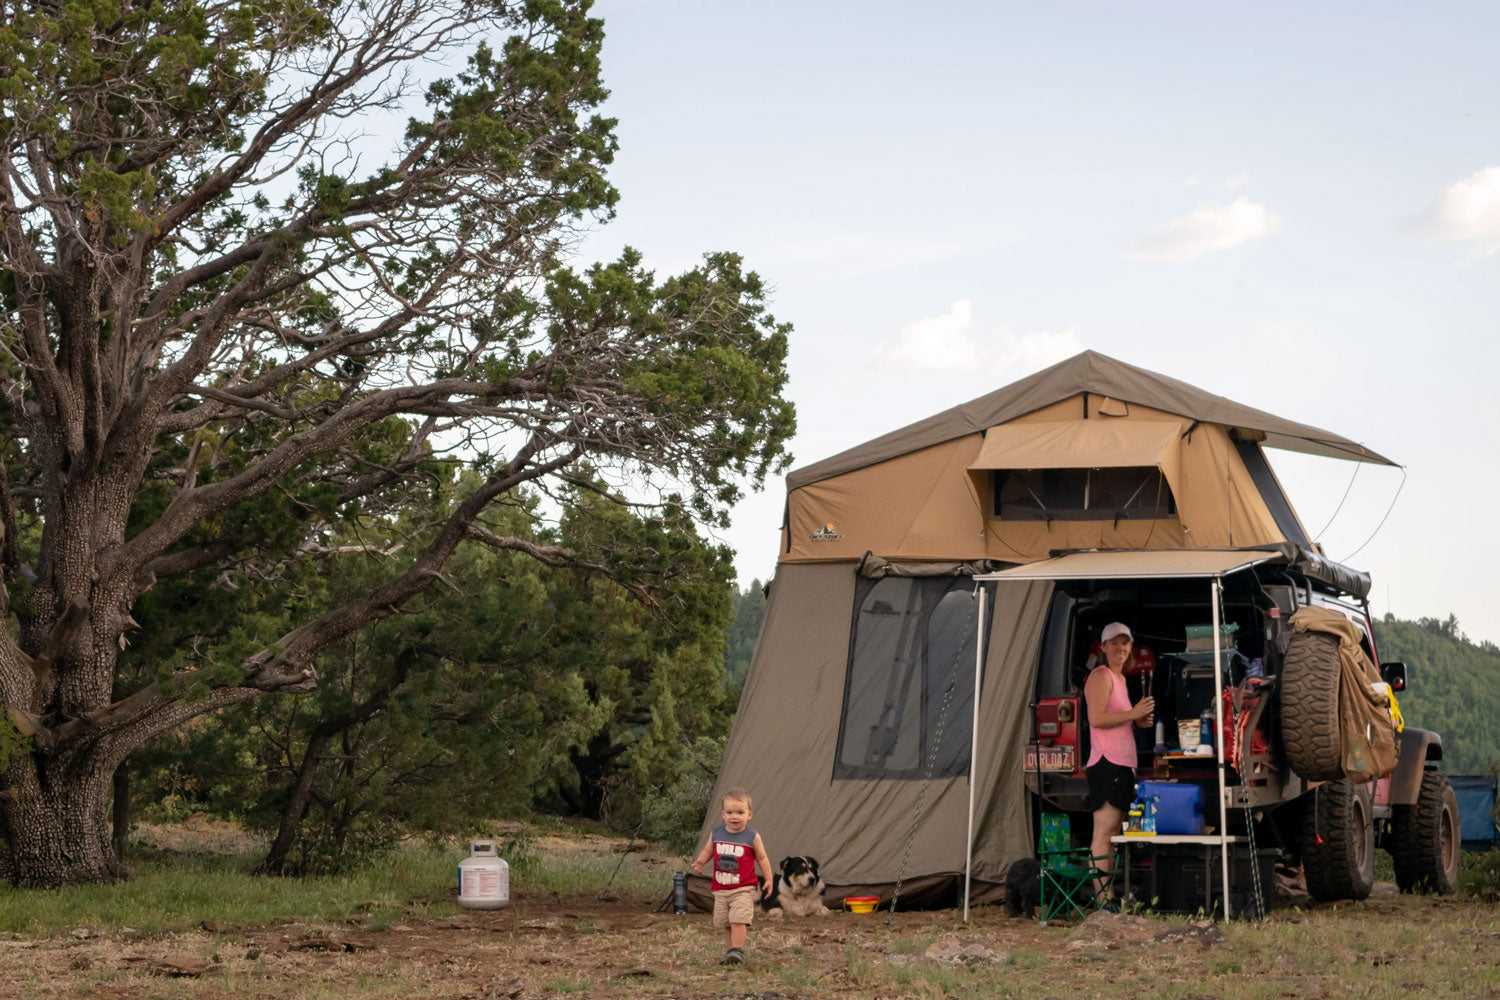 https://cdn.shopify.com/s/files/1/0046/7058/6968/files/camping-storage-ideas-photo-of-family-in-the-wilderness.jpg?v=1660761857